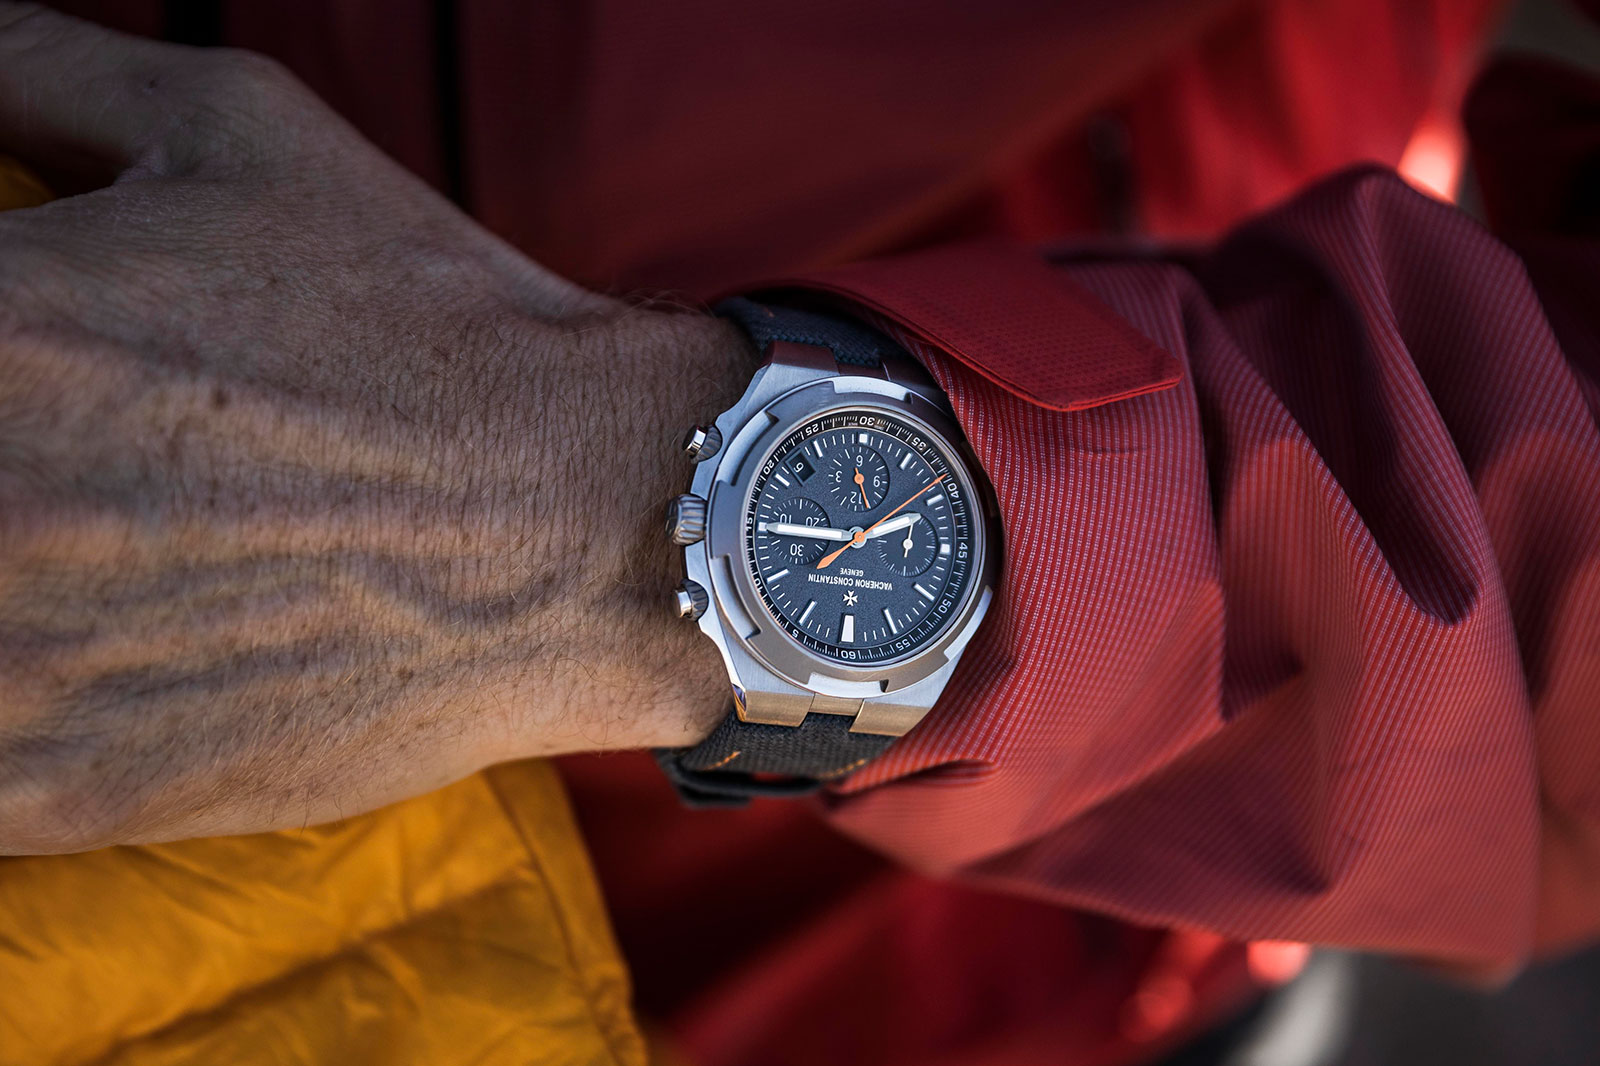 Hands-On with the Vacheron Constantin Overseas Chronograph Ref